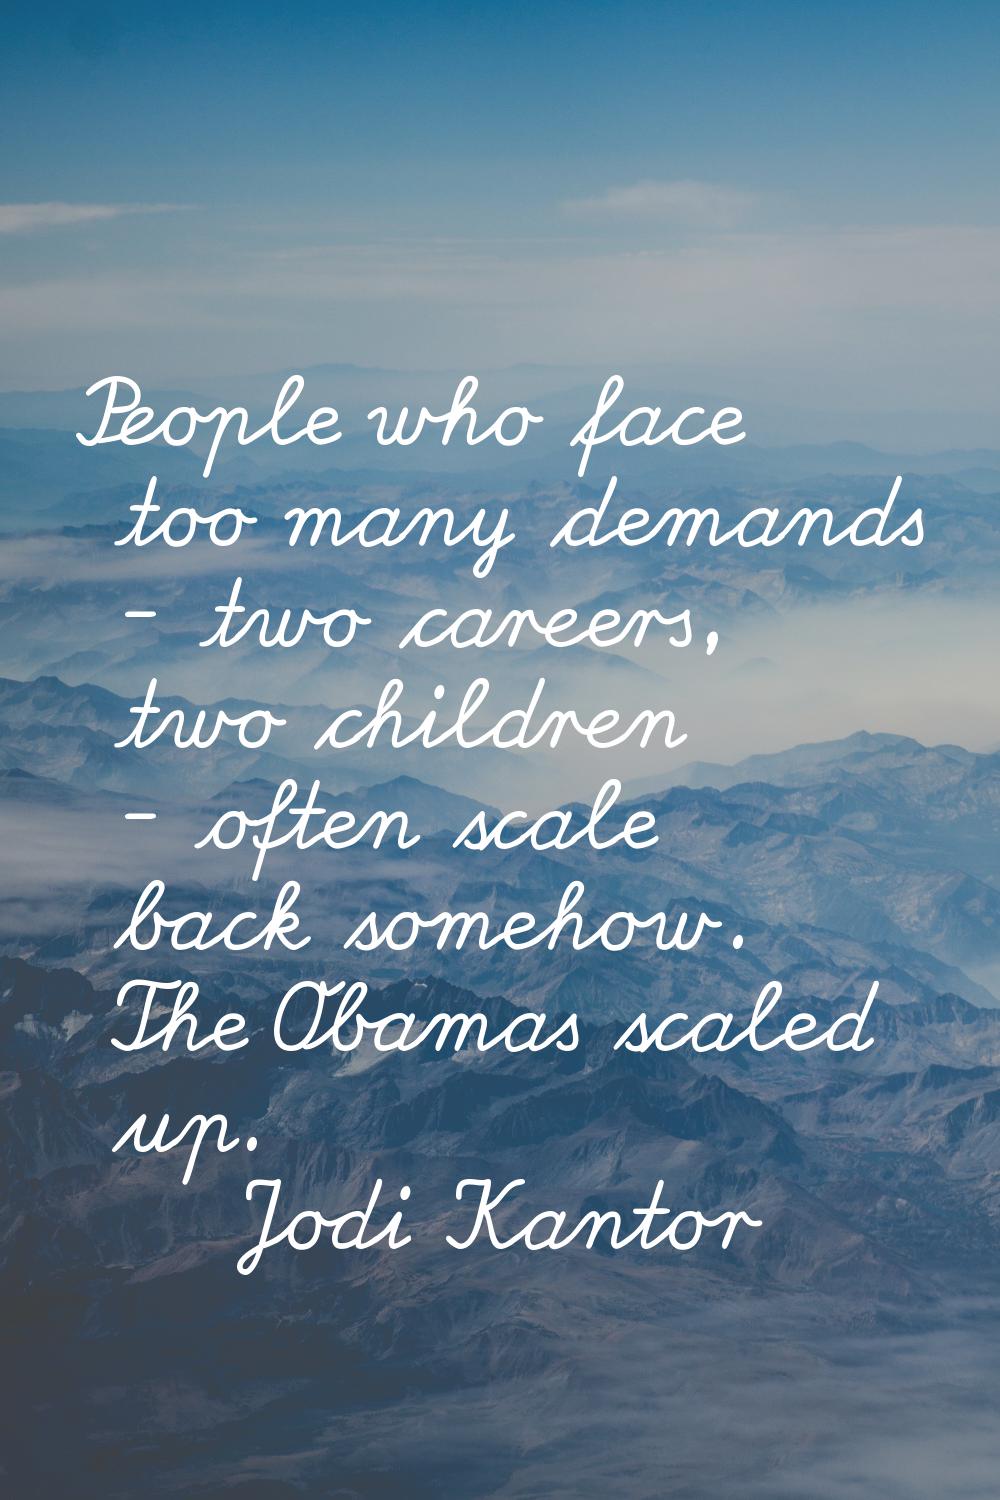 People who face too many demands - two careers, two children - often scale back somehow. The Obamas